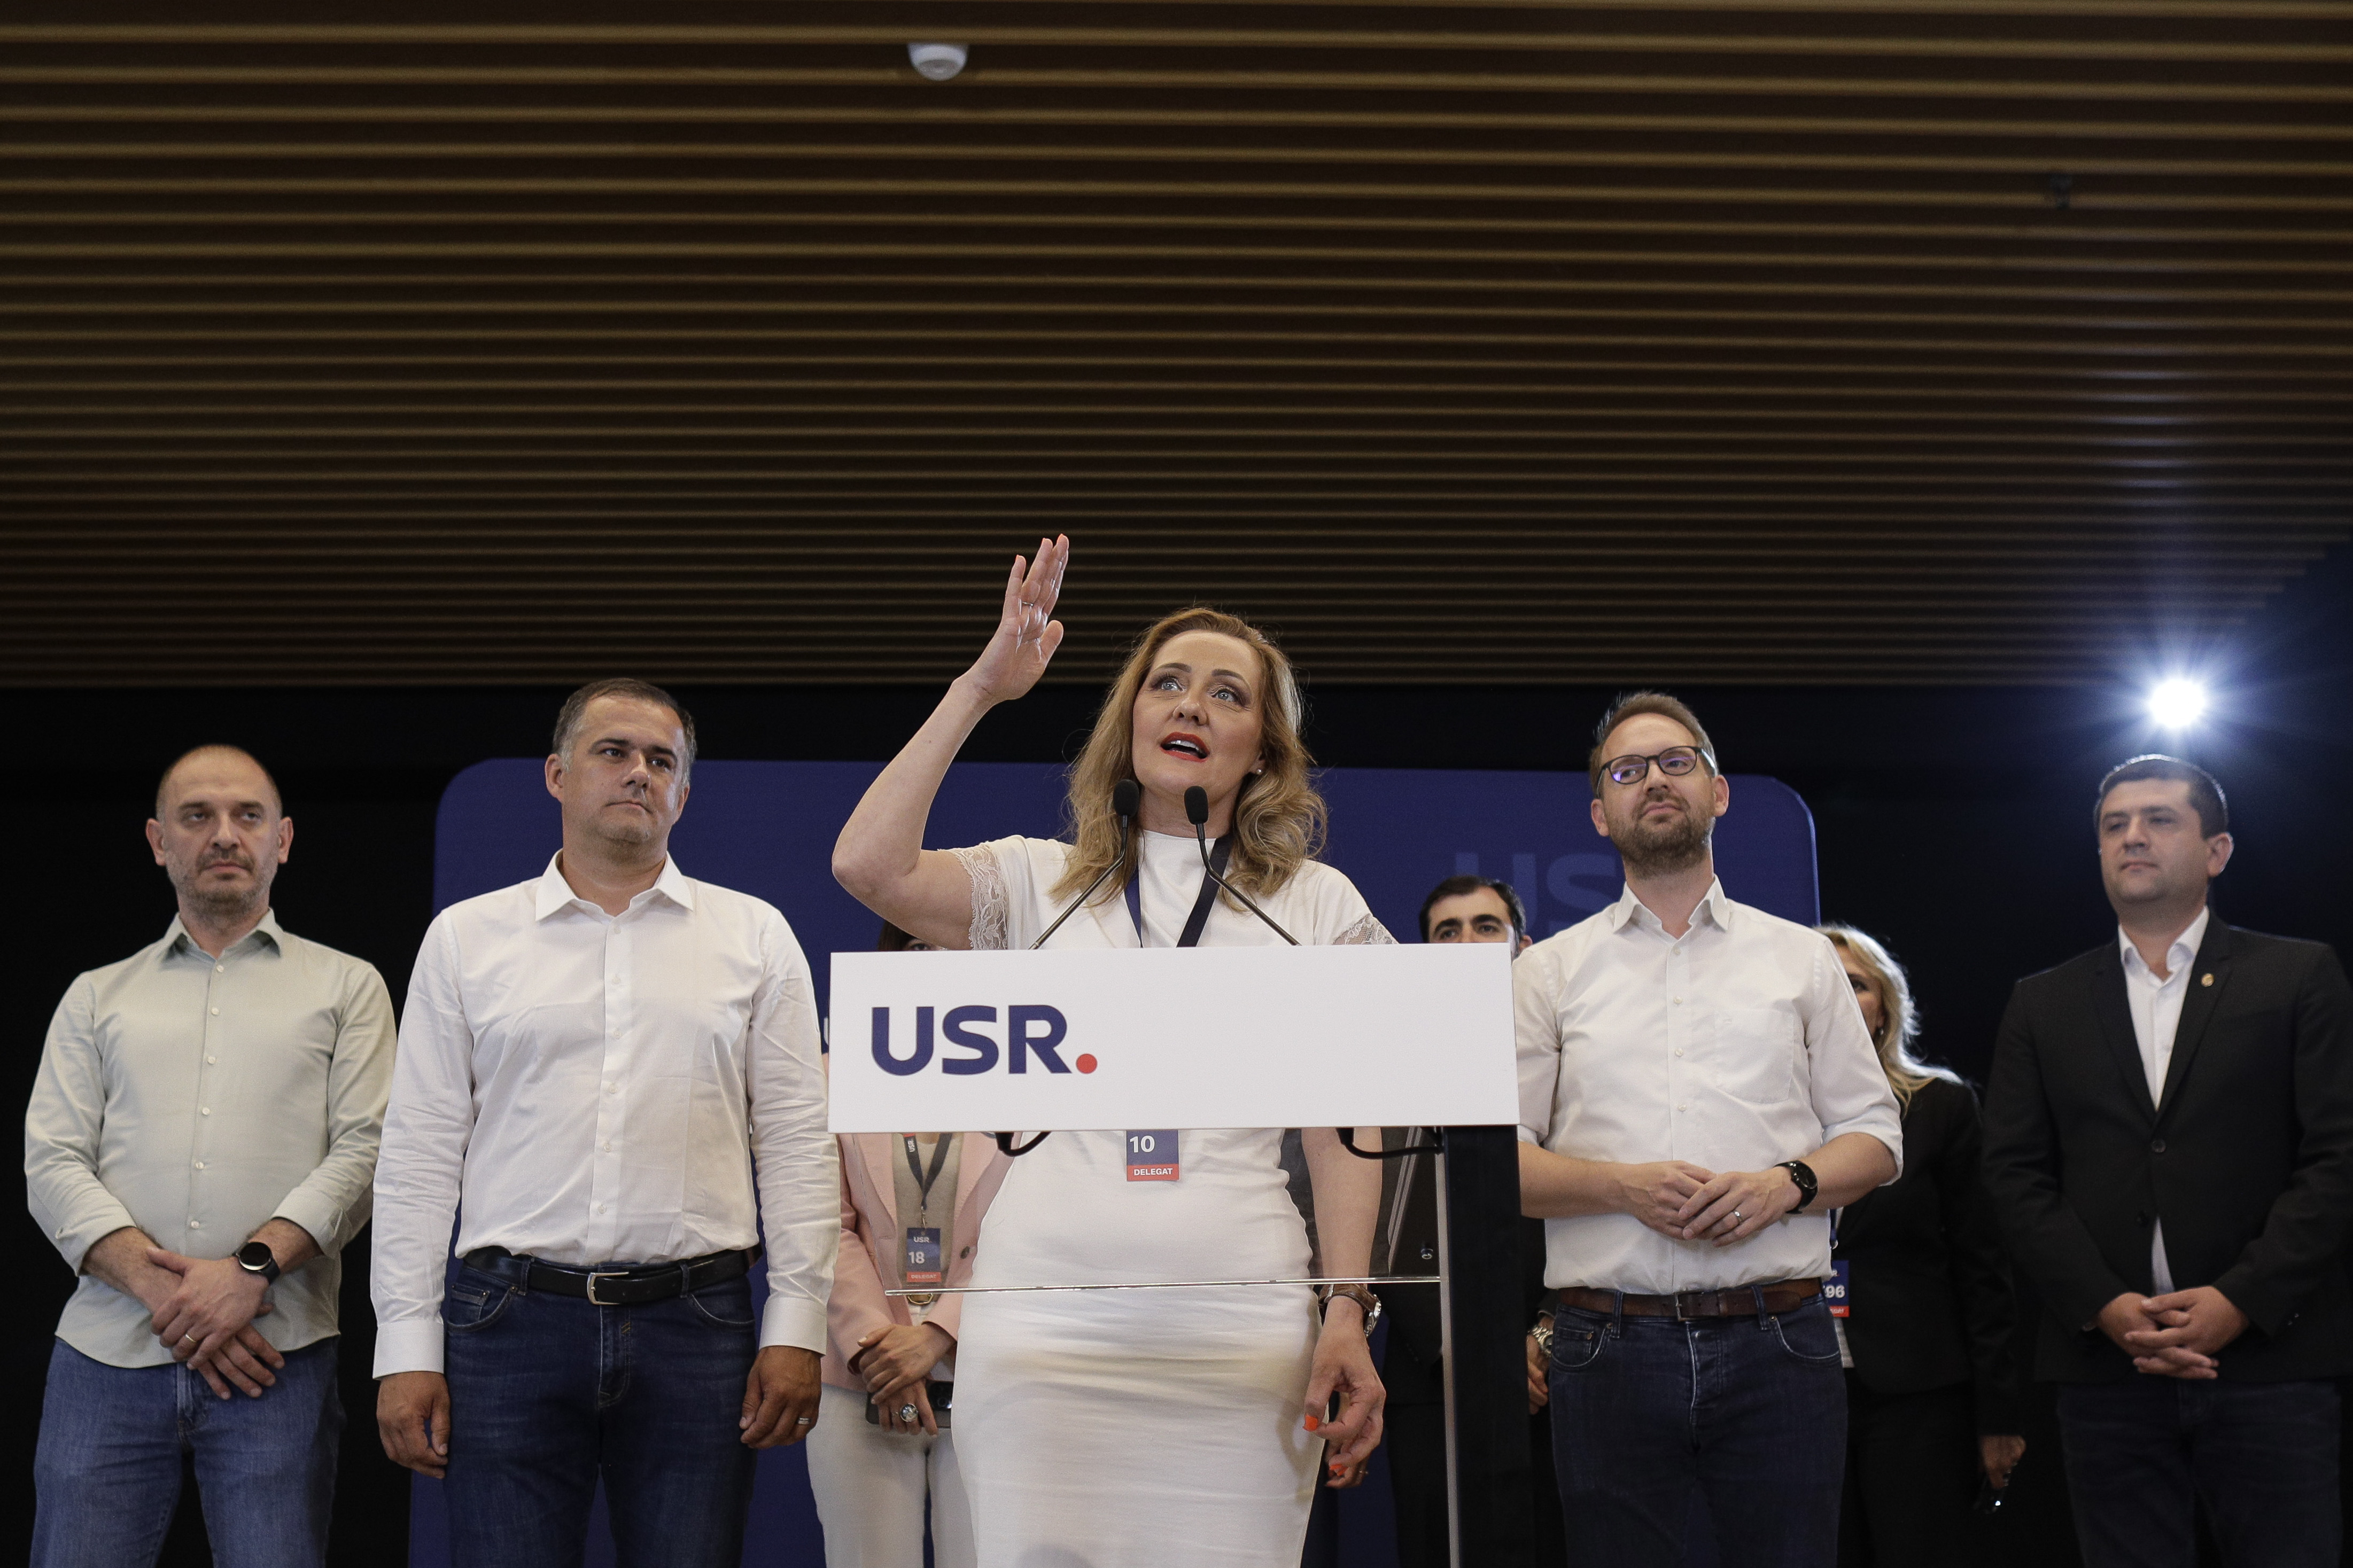 Center-right Romanian opposition party USR chooses new leader as presidential candidate